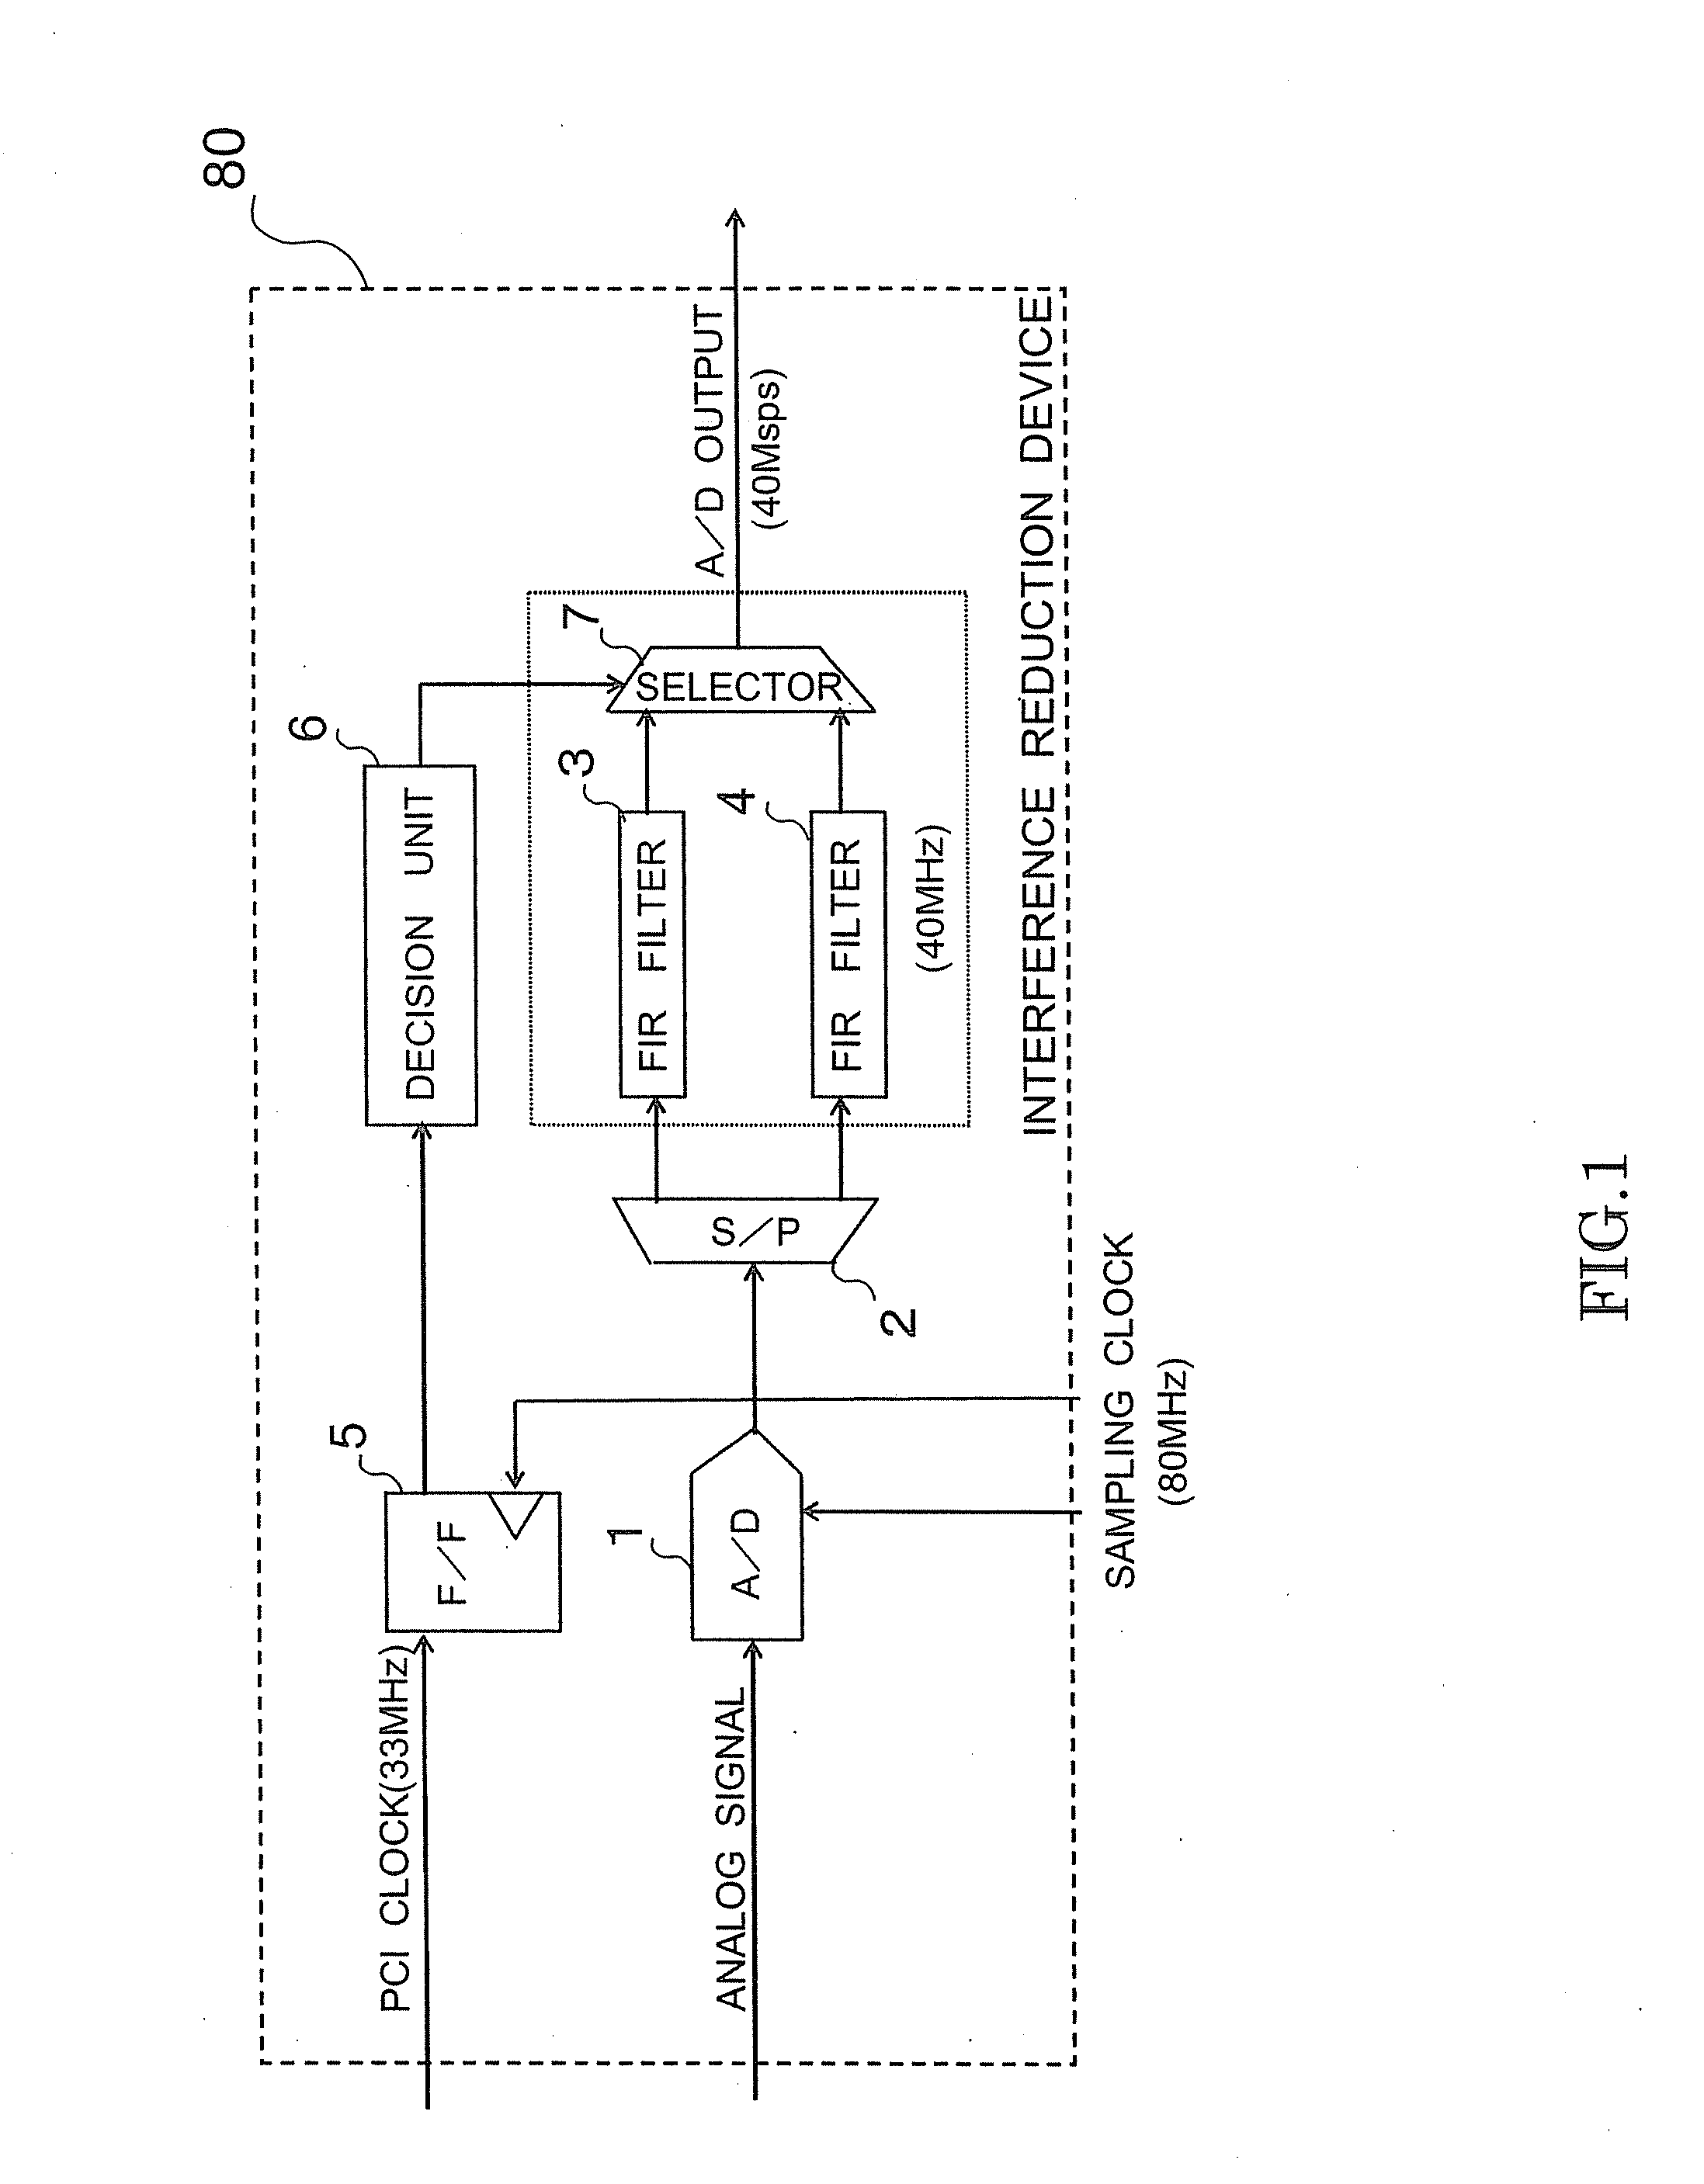 Interference reduction device